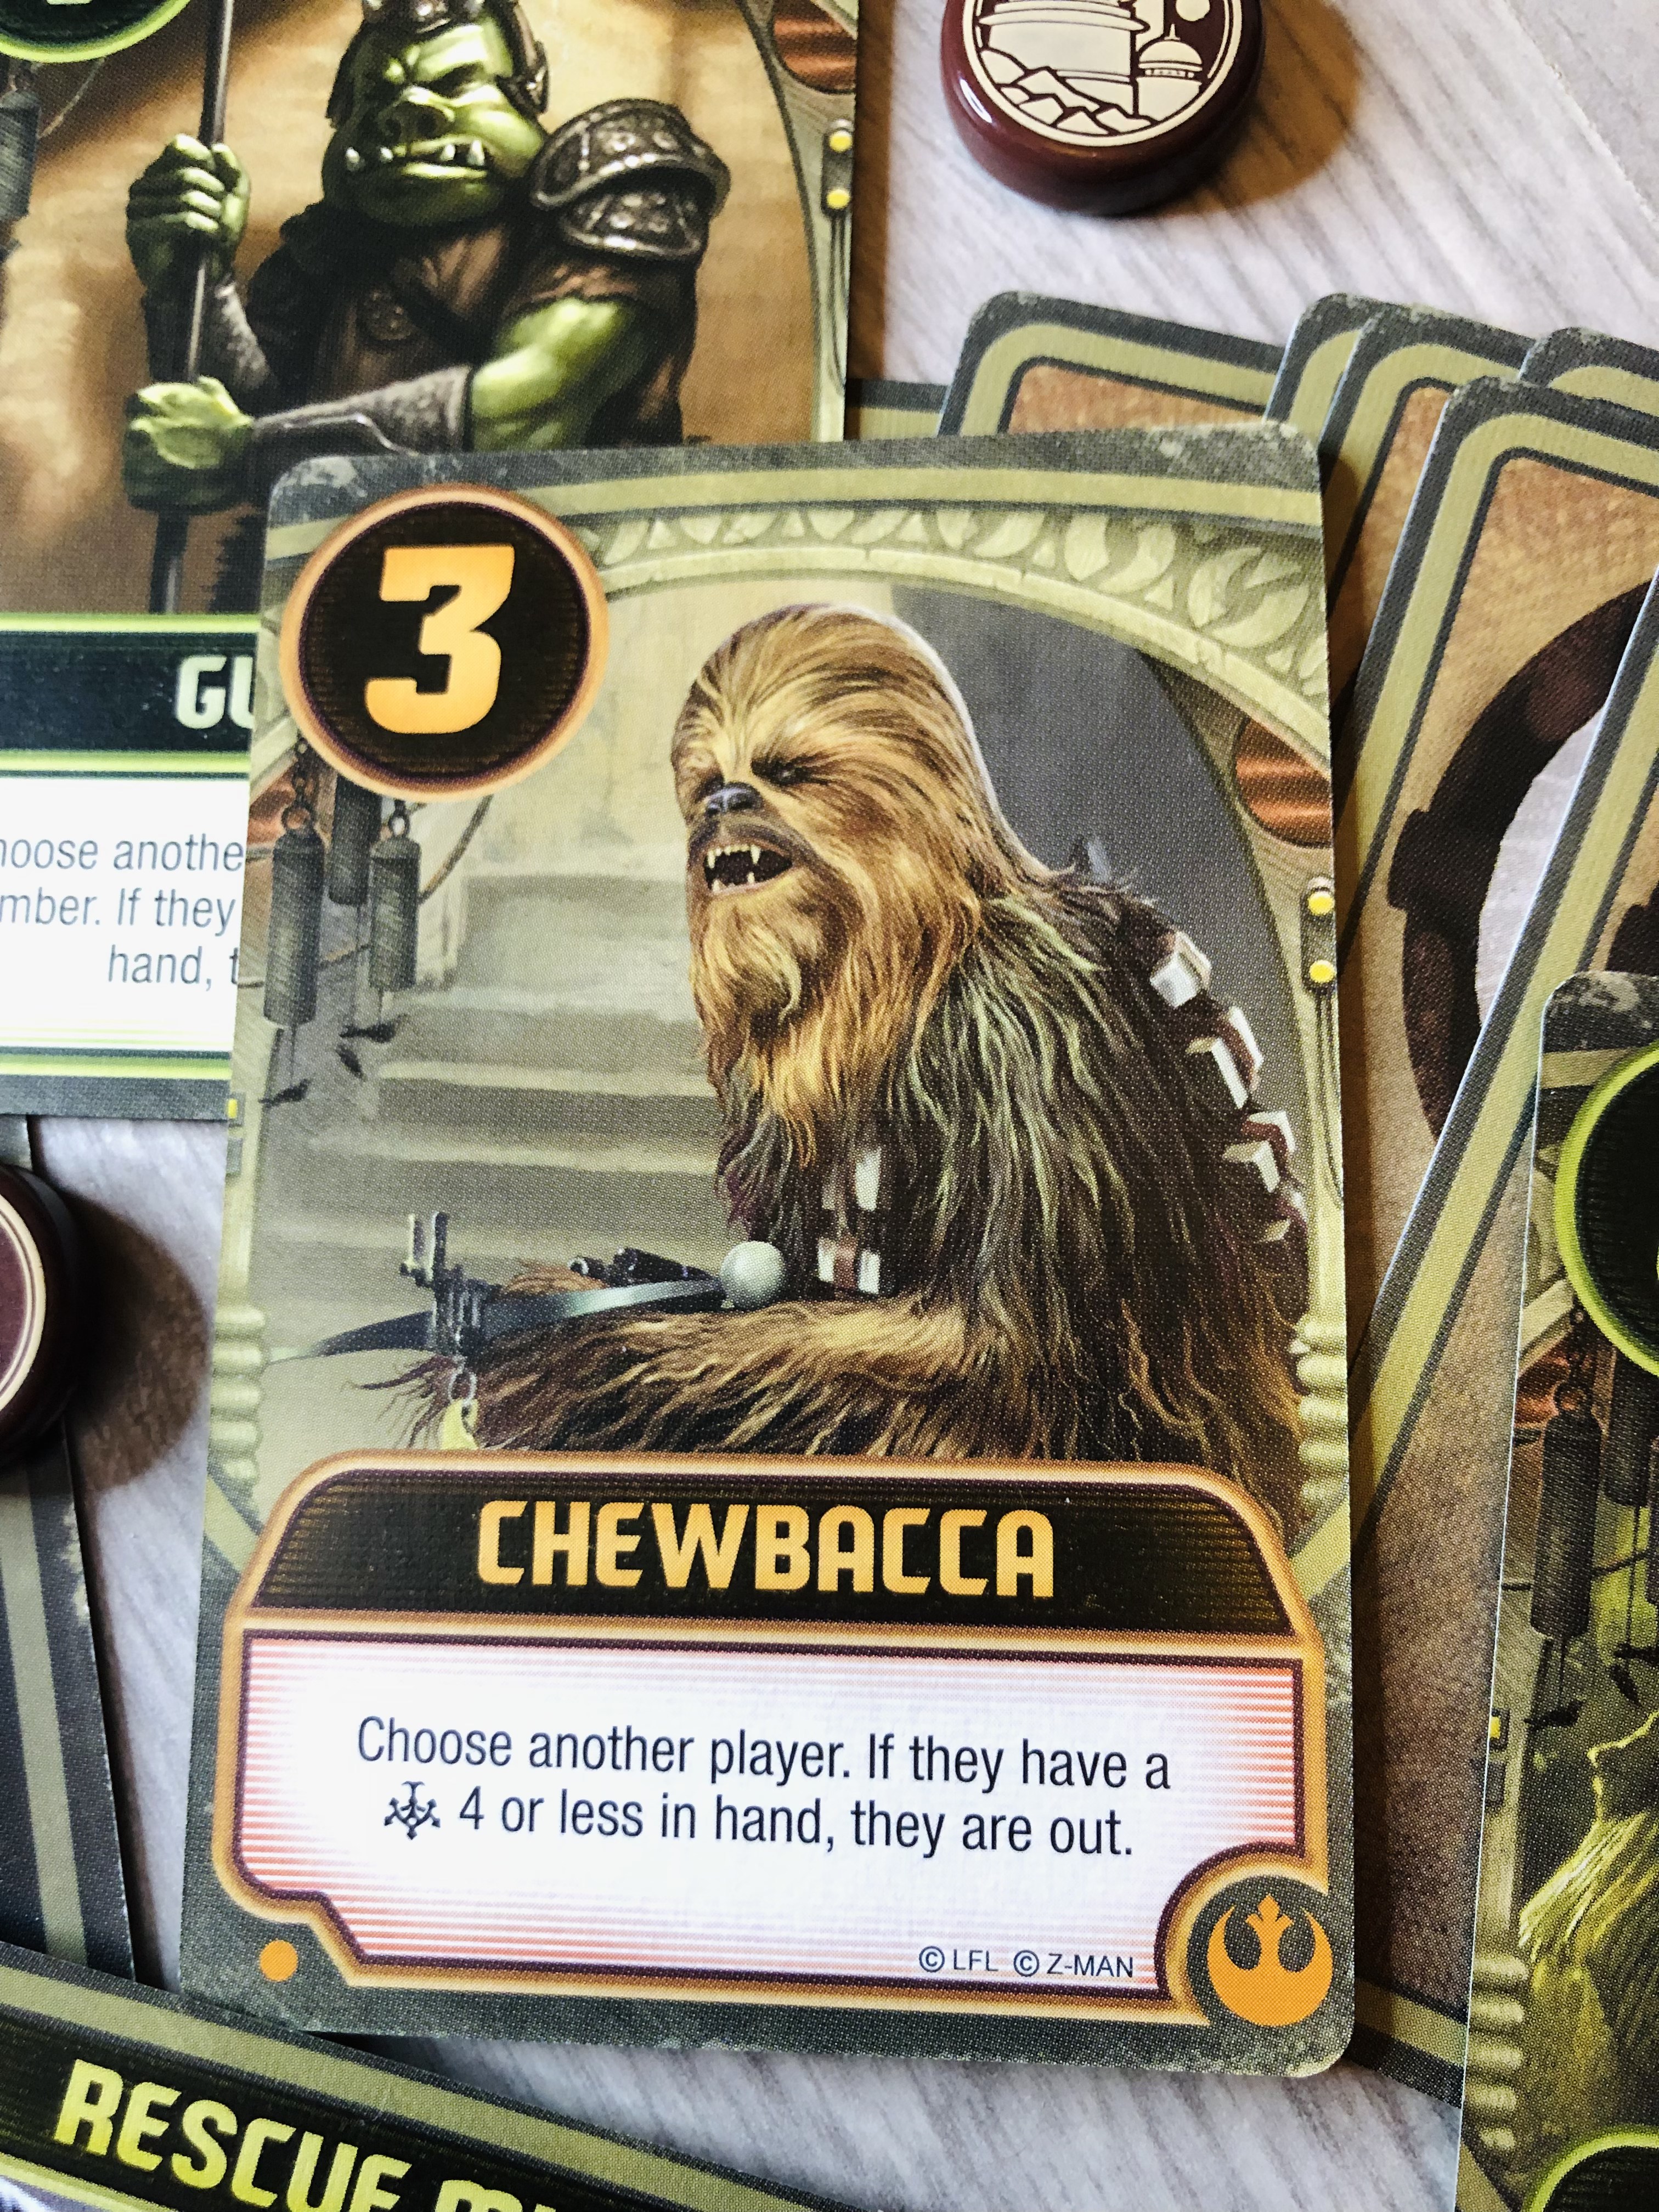 Star Wars Jabbas Palace – A Love Letter Game chewbacca